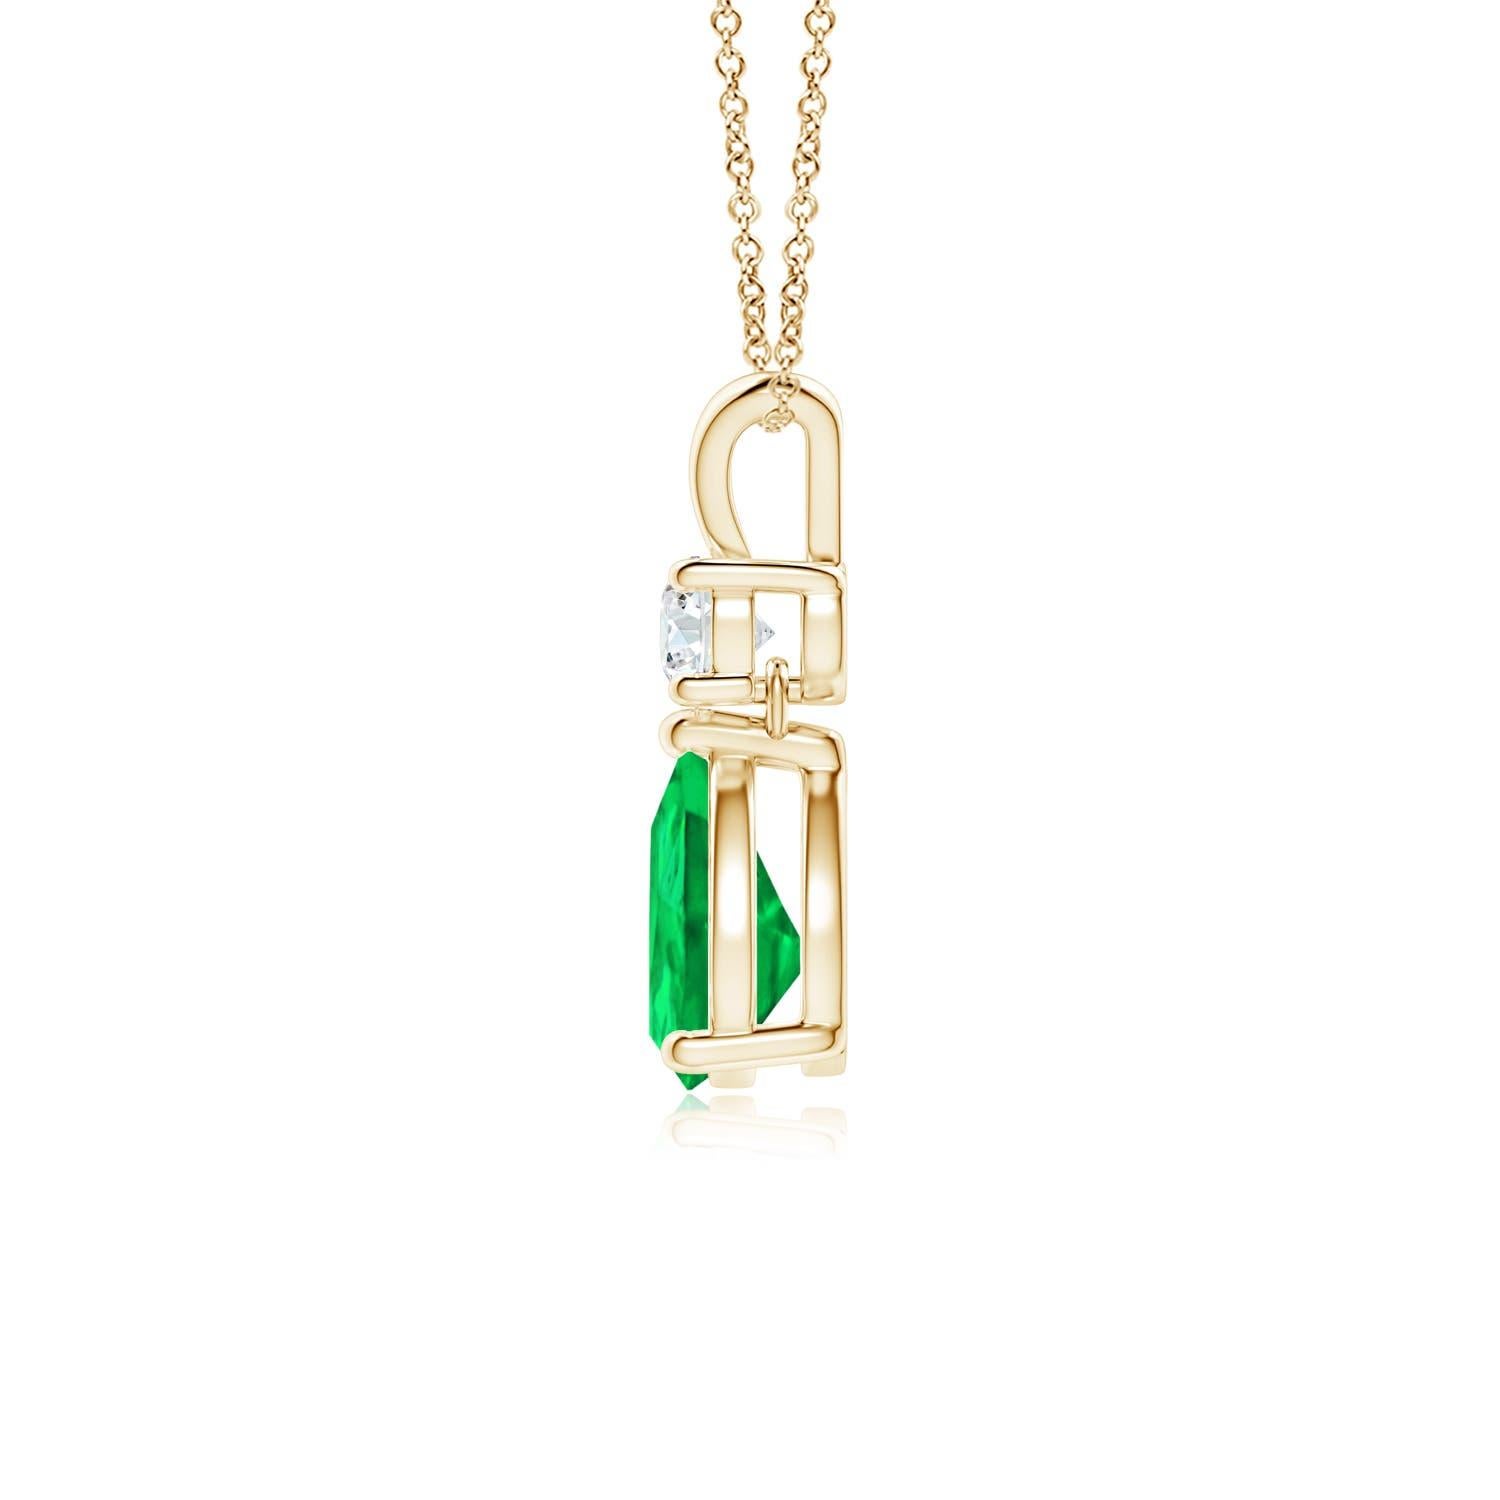 A vivid green pear cut emerald dangles from a sparkling white diamond on this elegant drop pendant. The lustrous V bale adds beauty to this 14k yellow gold emerald and diamond pendant. It exudes luxurious charm with its remarkable long drop